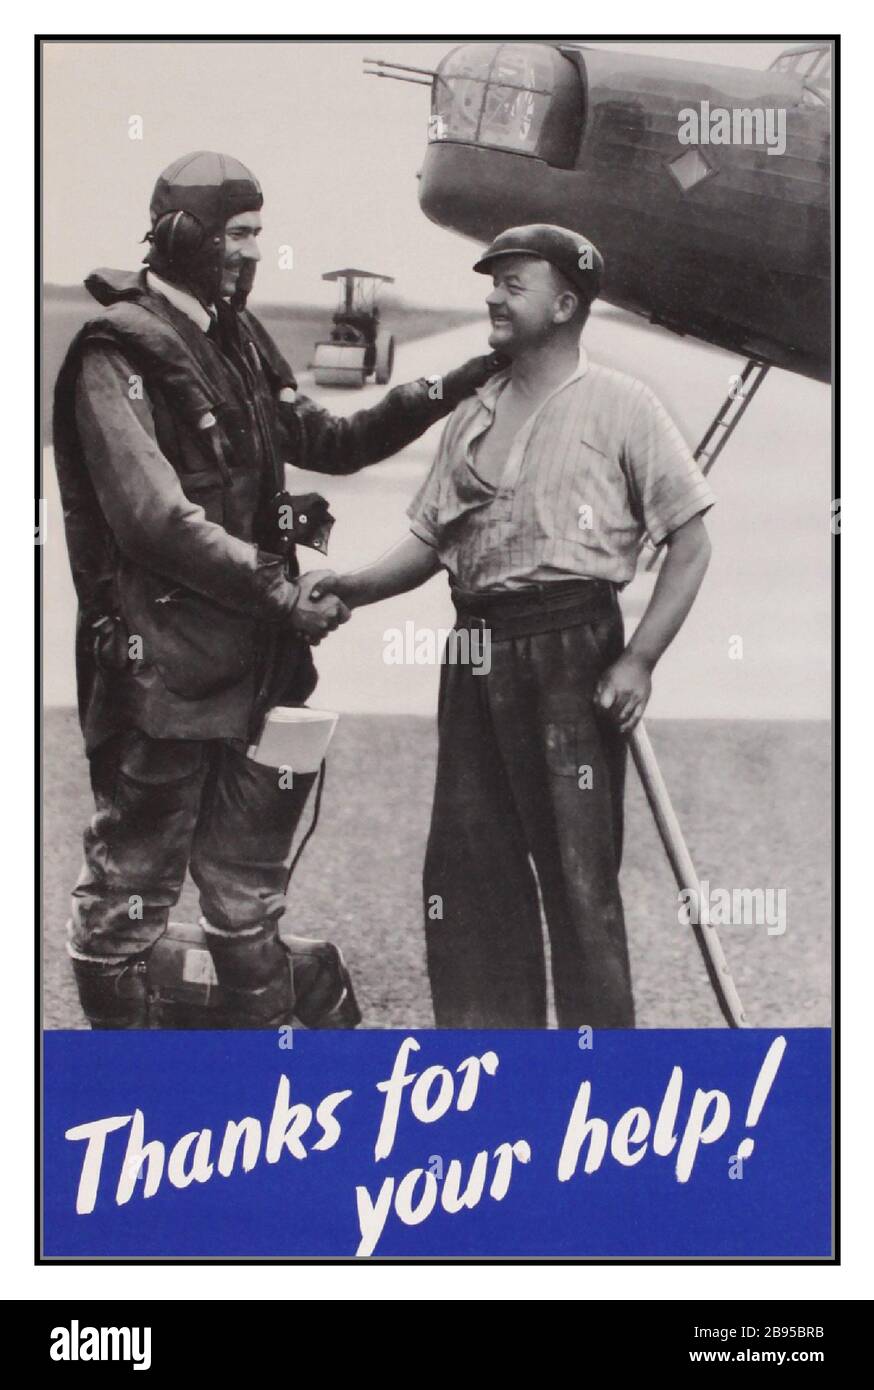 Vintage 1942 WW2 World War II Propaganda Poster ‘Thanks for your help’ Lancaster RAF Pilot Airman shaking hands with Airfield runway workman, photographic poster printed for HMSO by Henry Hildesley c.1942 Stock Photo